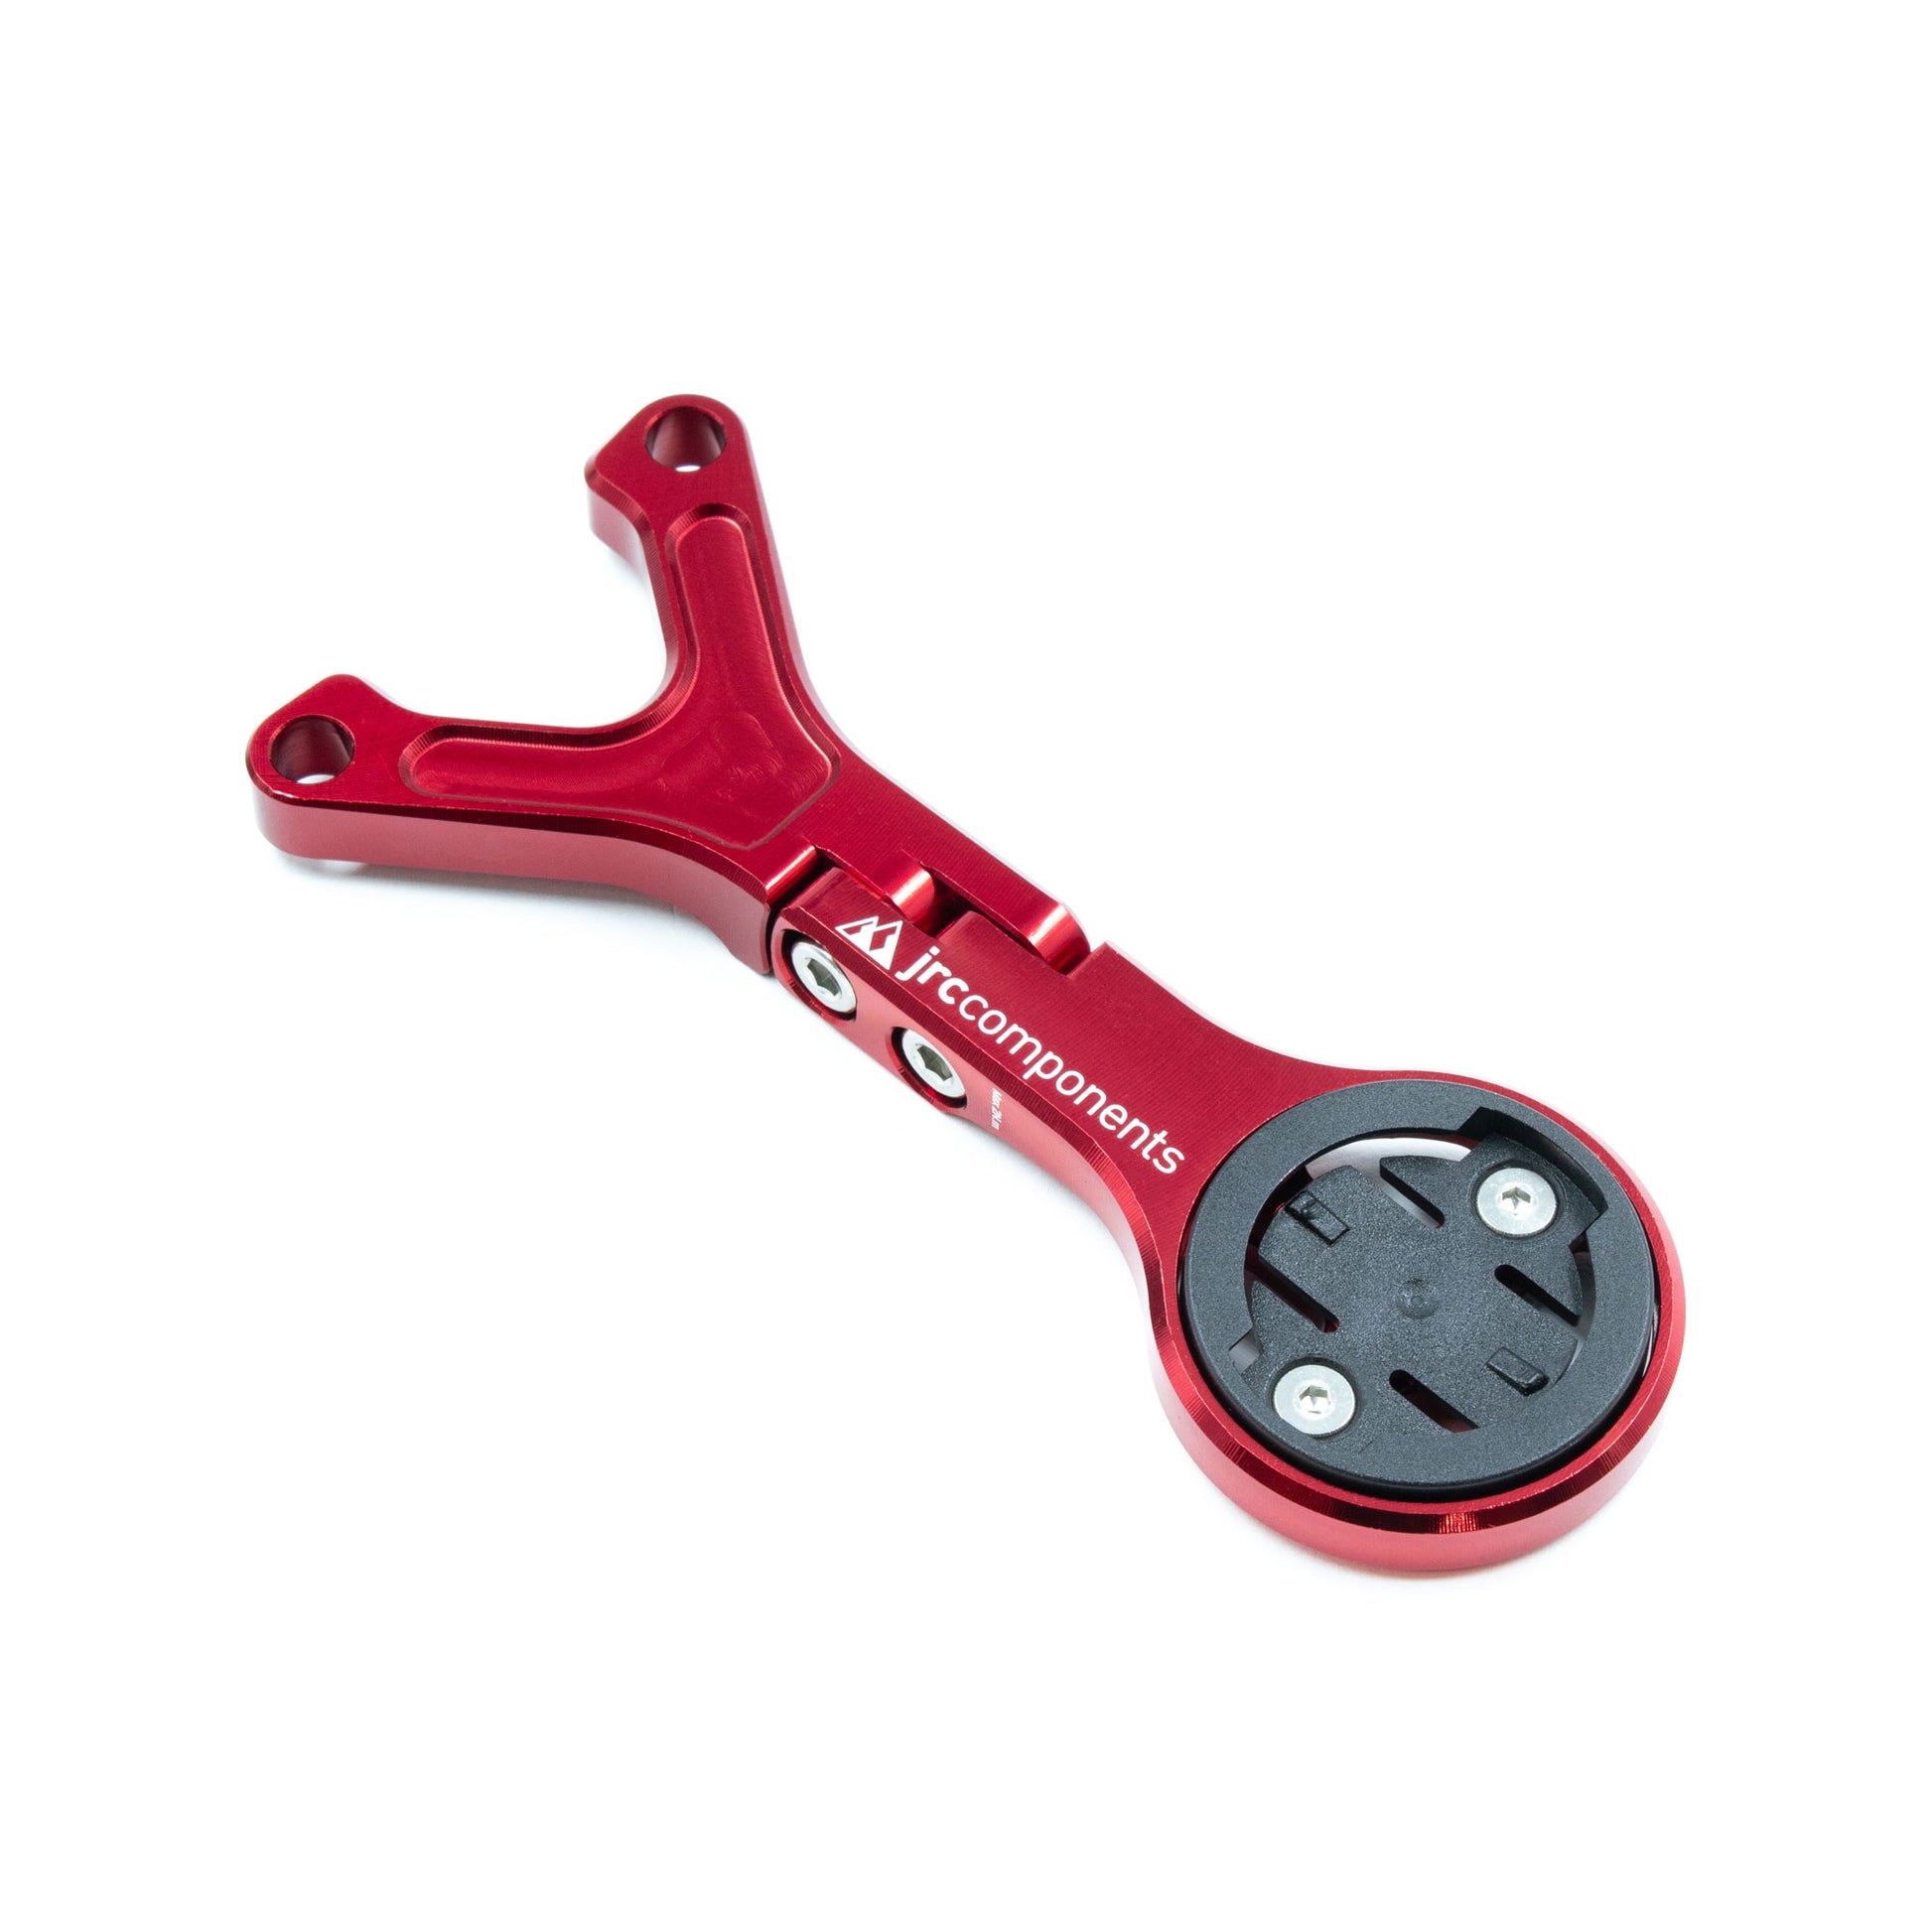 JRC Components, Lightweight Underbar Out Front Mount GPS Computer Mount for Cannondale Hollowgram Knot and Save Handlebar and Stem System for Wahoo in Red